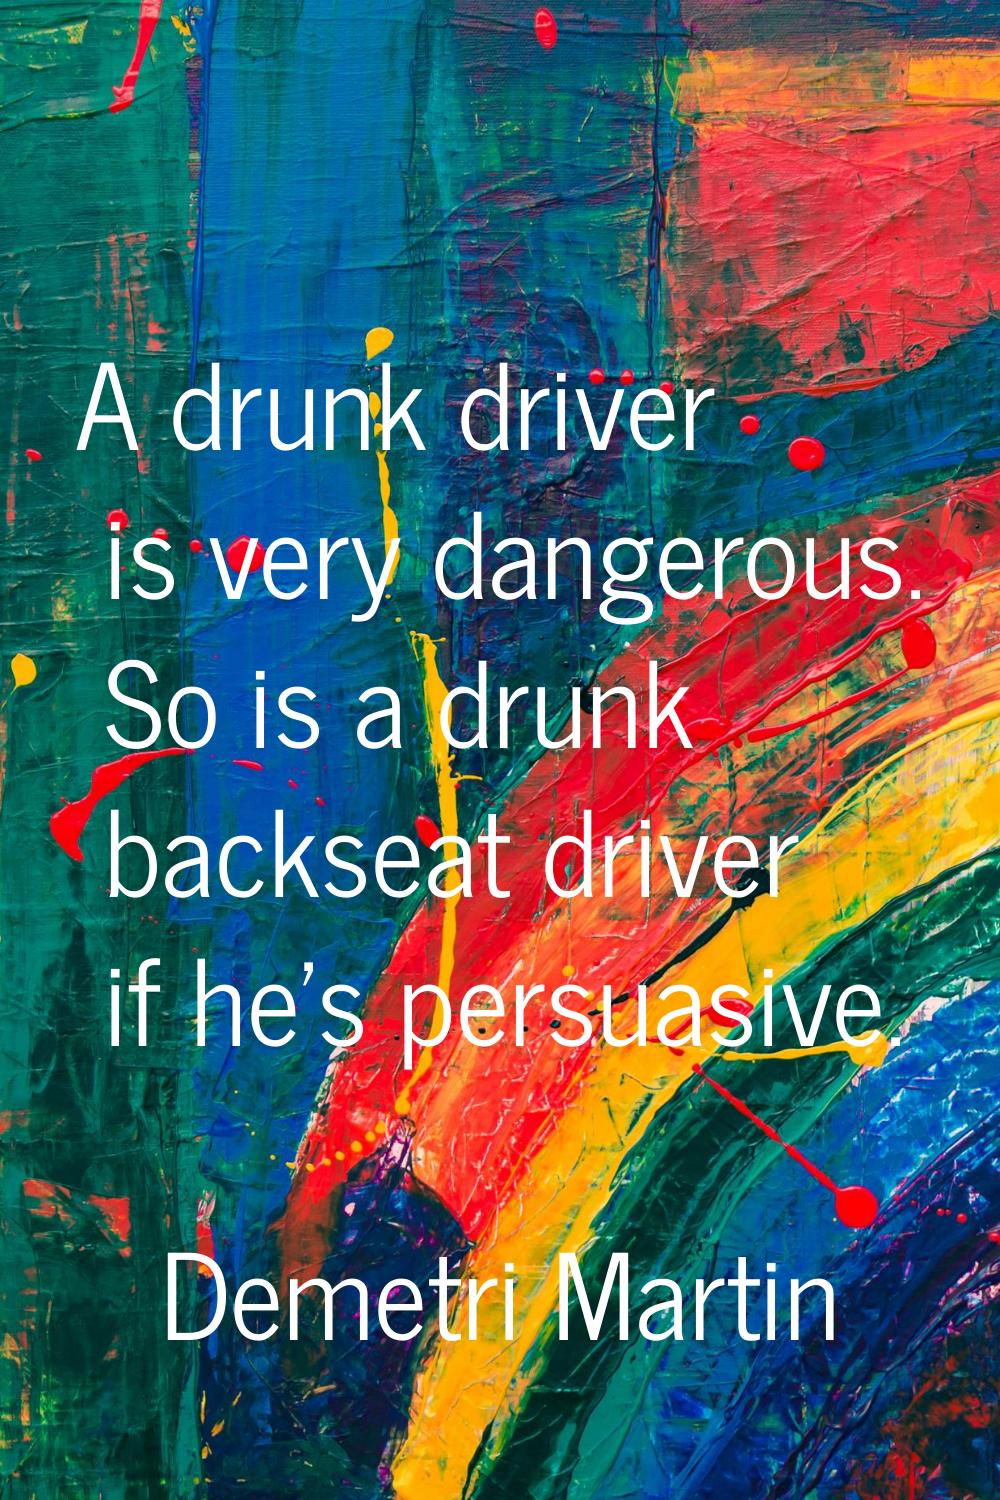 A drunk driver is very dangerous. So is a drunk backseat driver if he's persuasive.